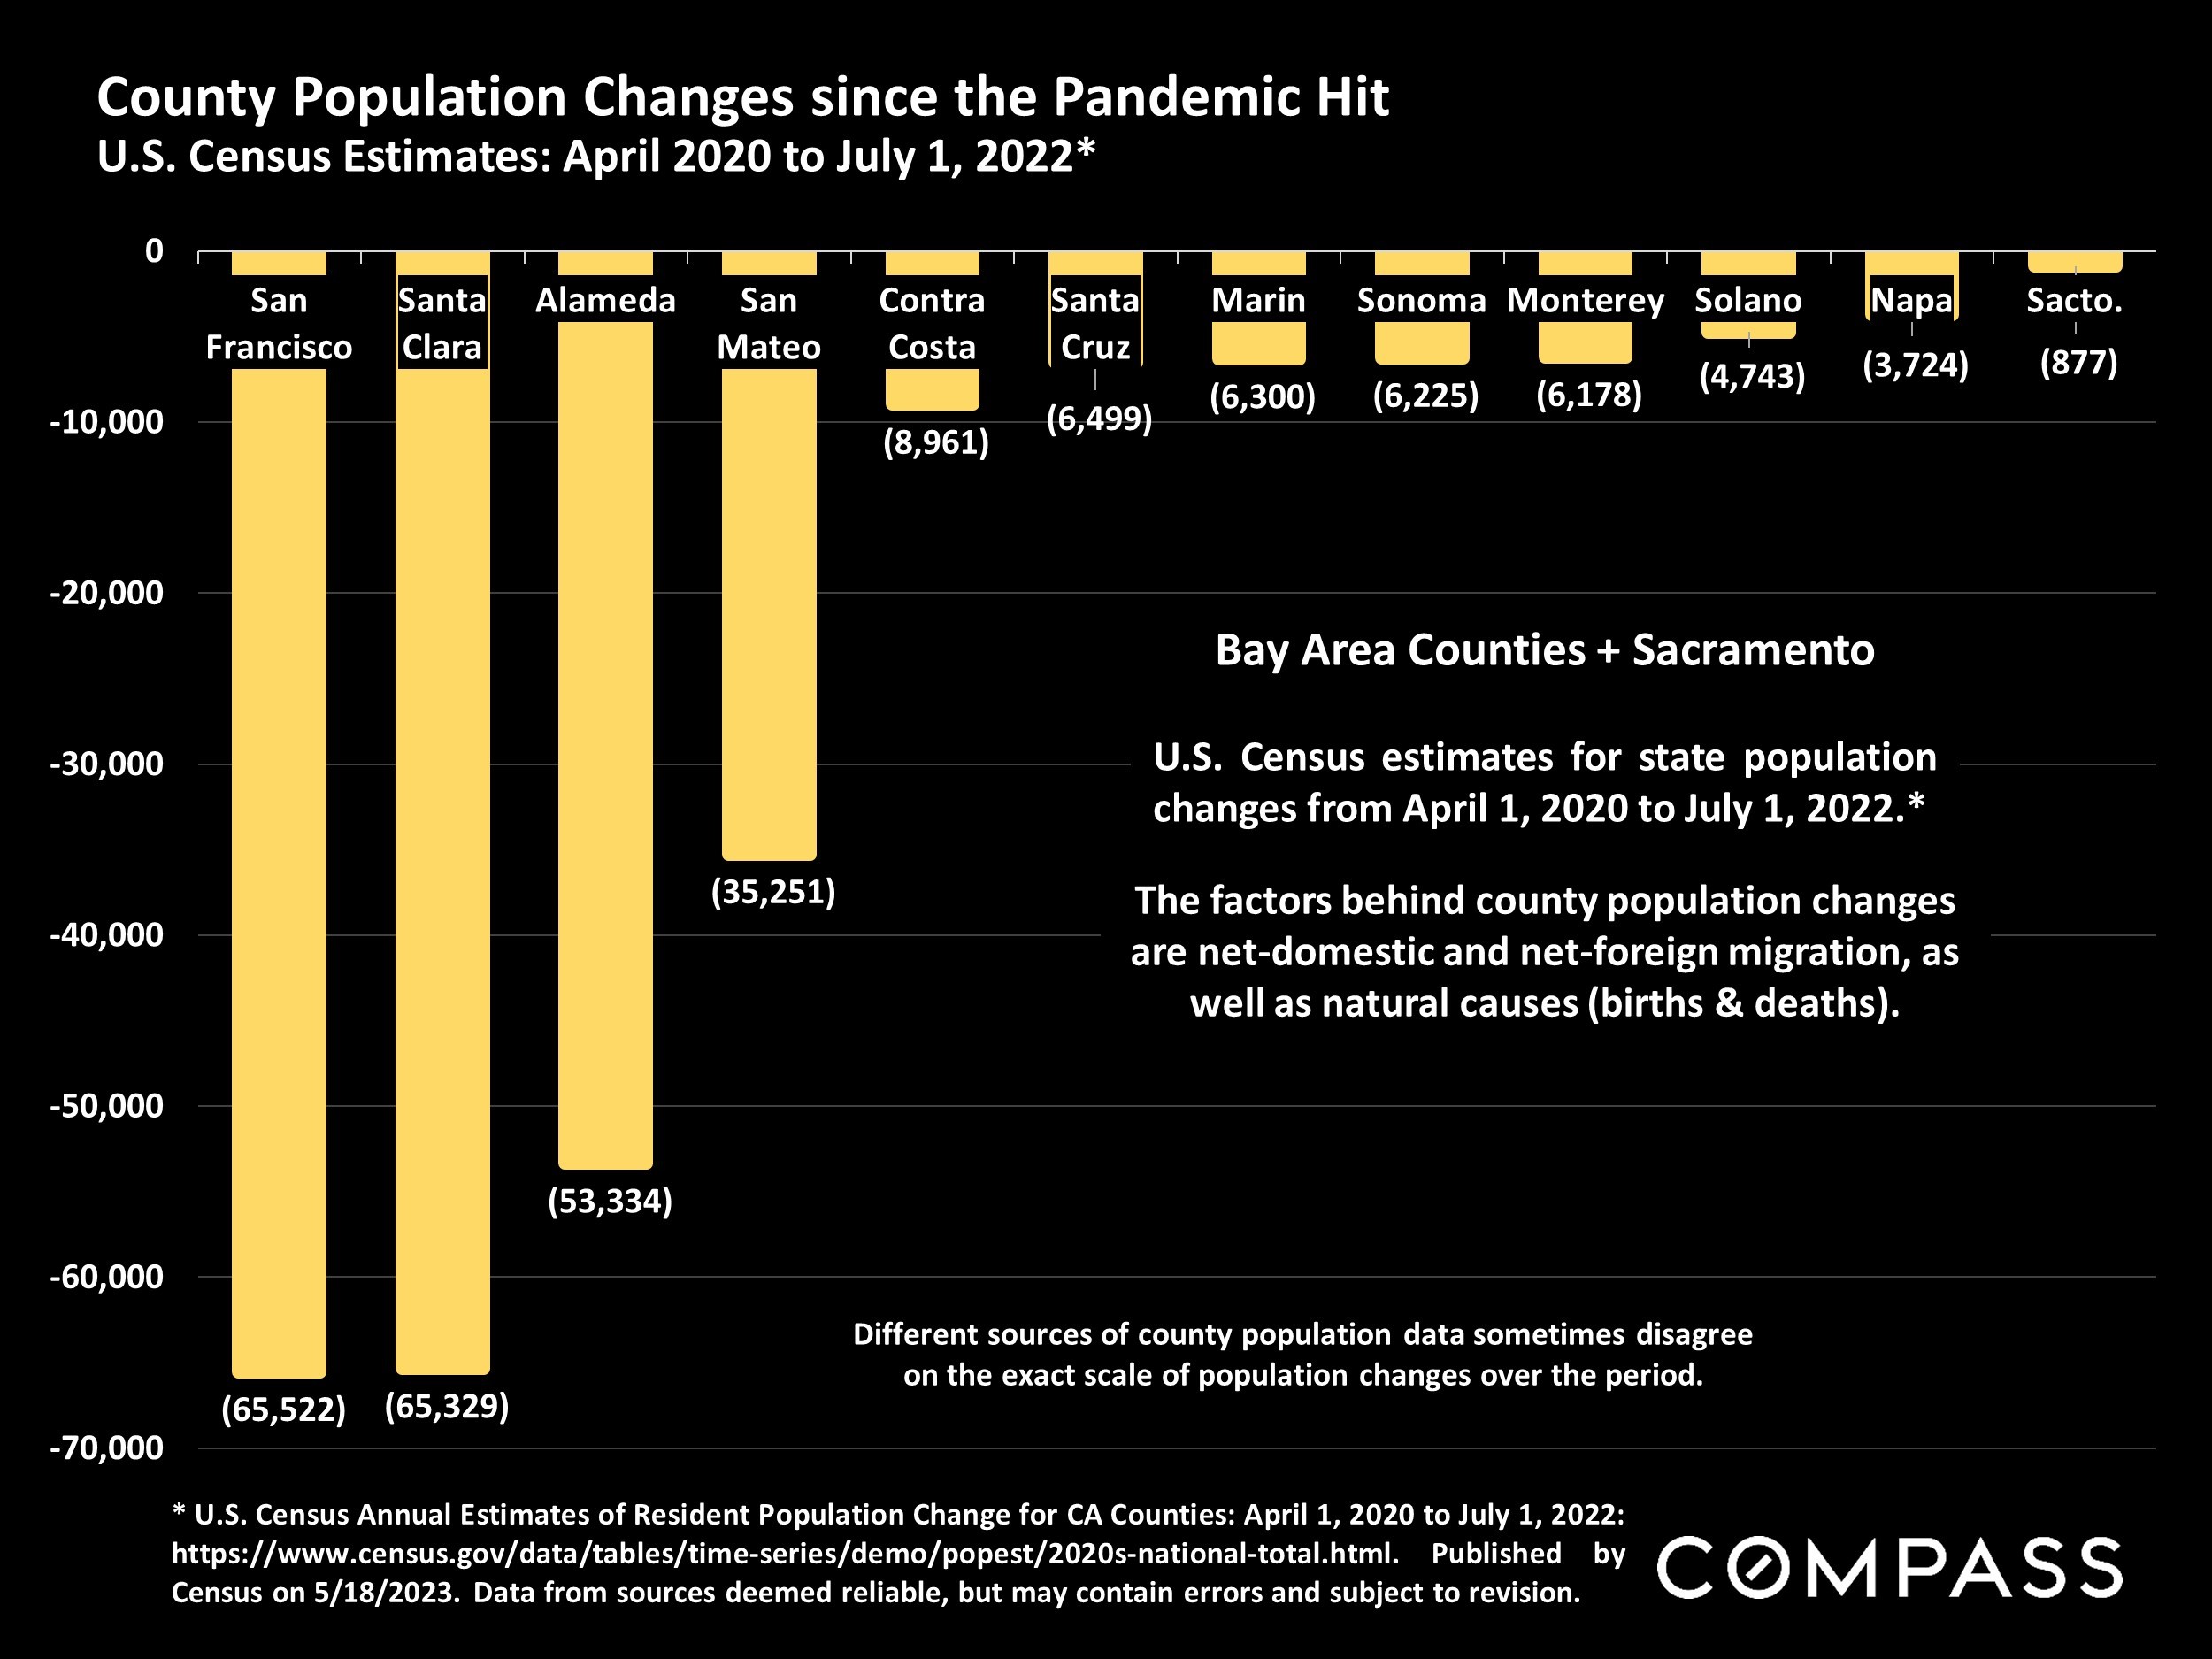 Country population changes since the pandemic hit